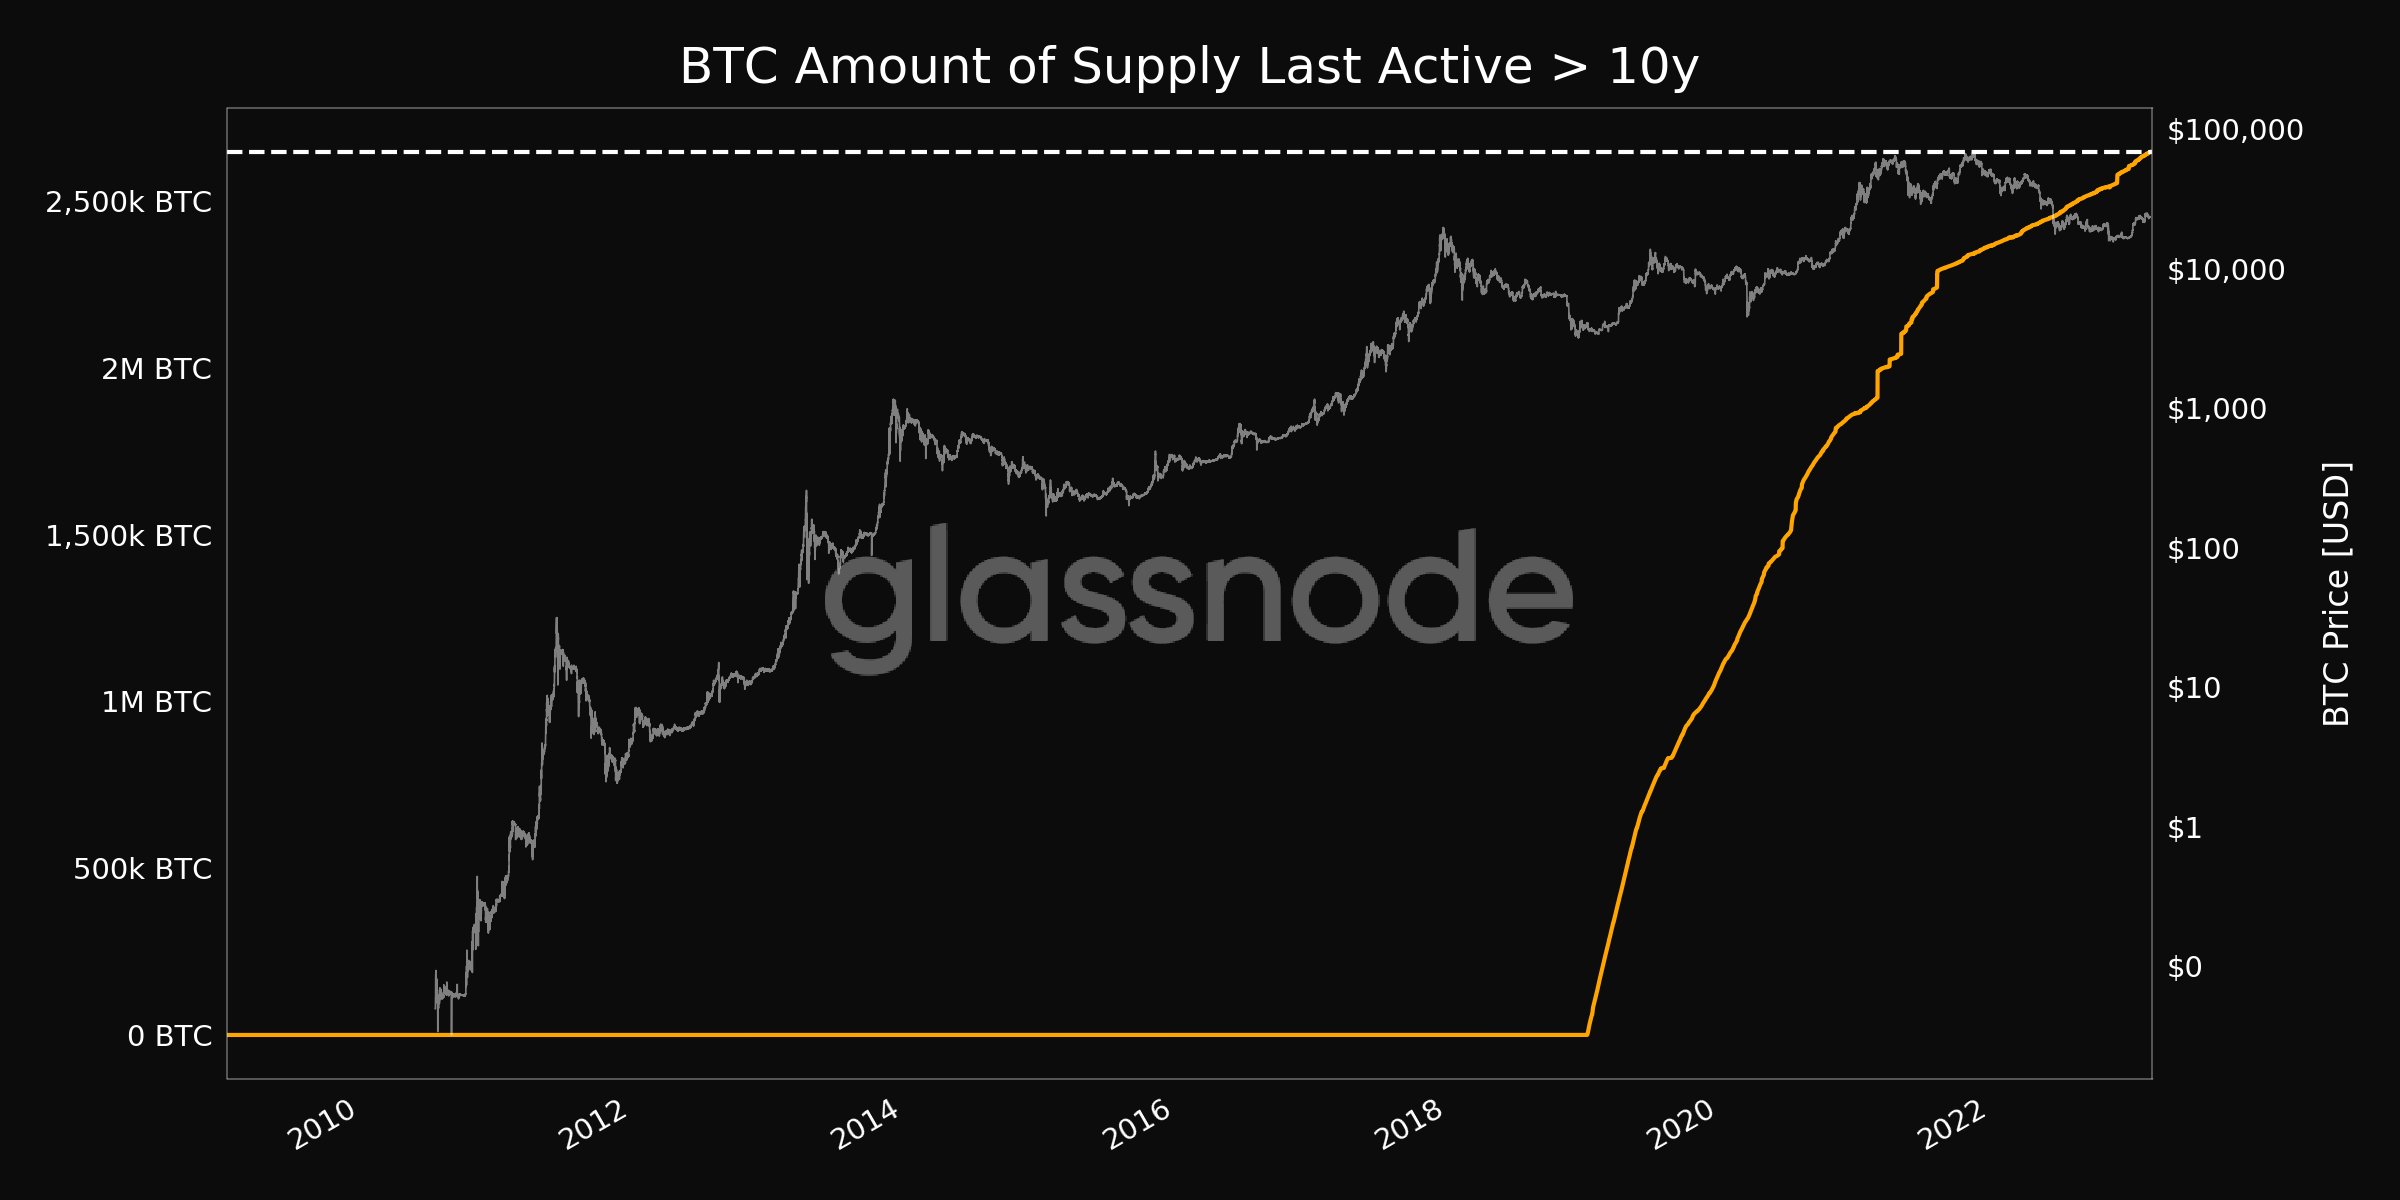 Bitcoin addresses with 1+ BTC reach new all-time high - 1